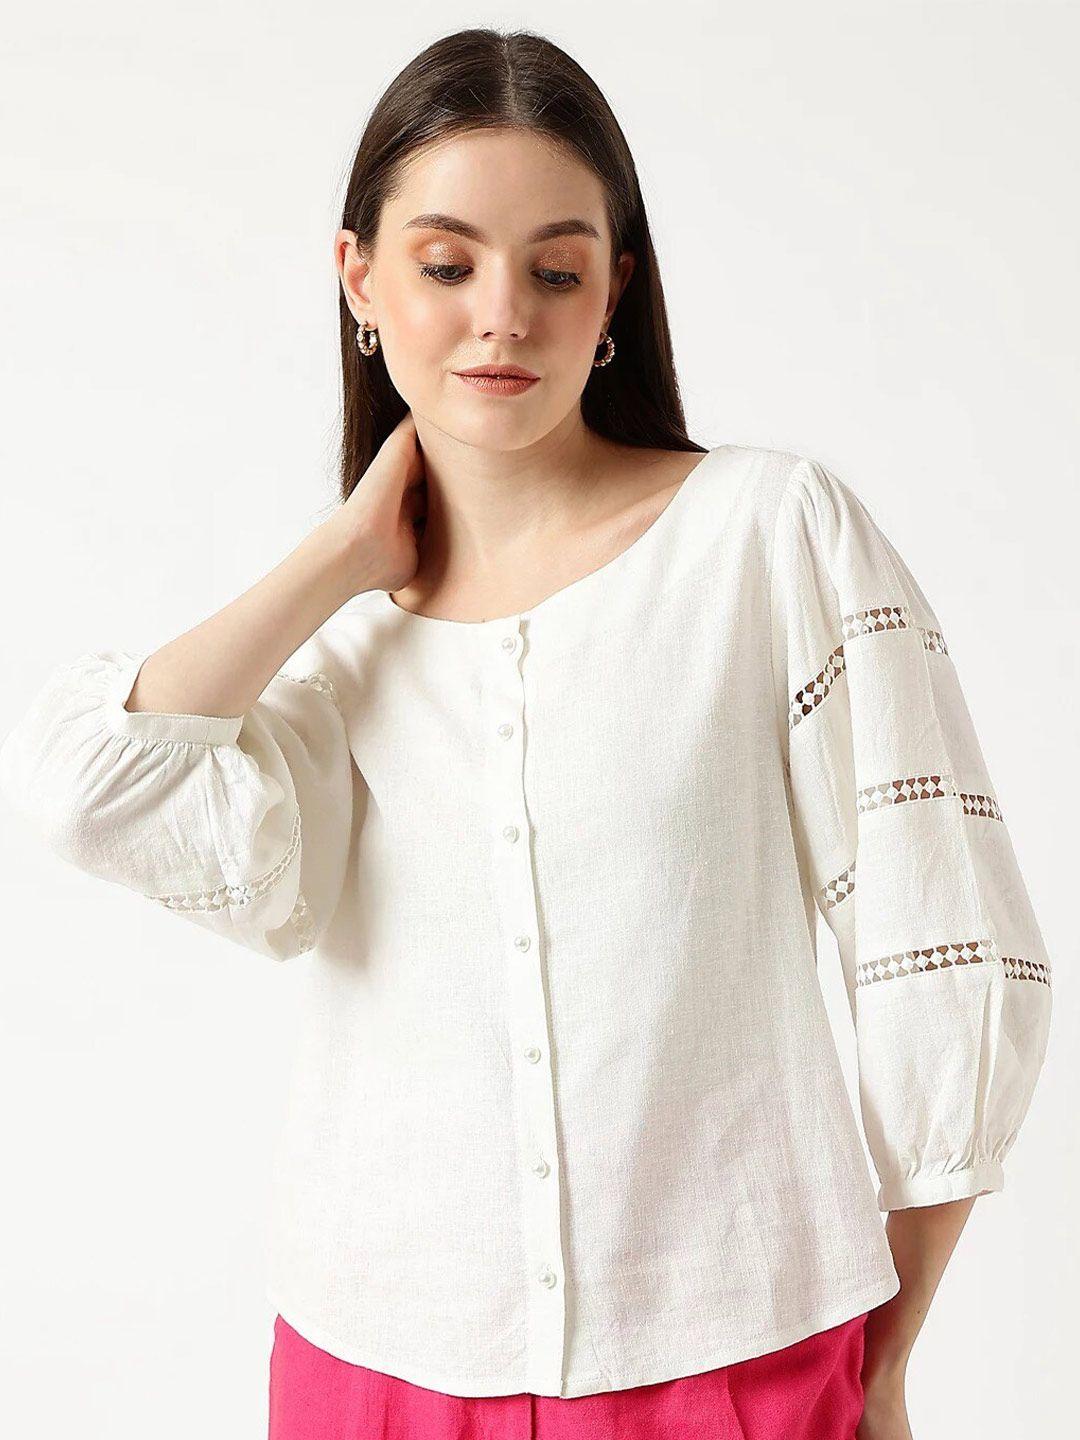 marks & spencer puff sleeves shirt style top